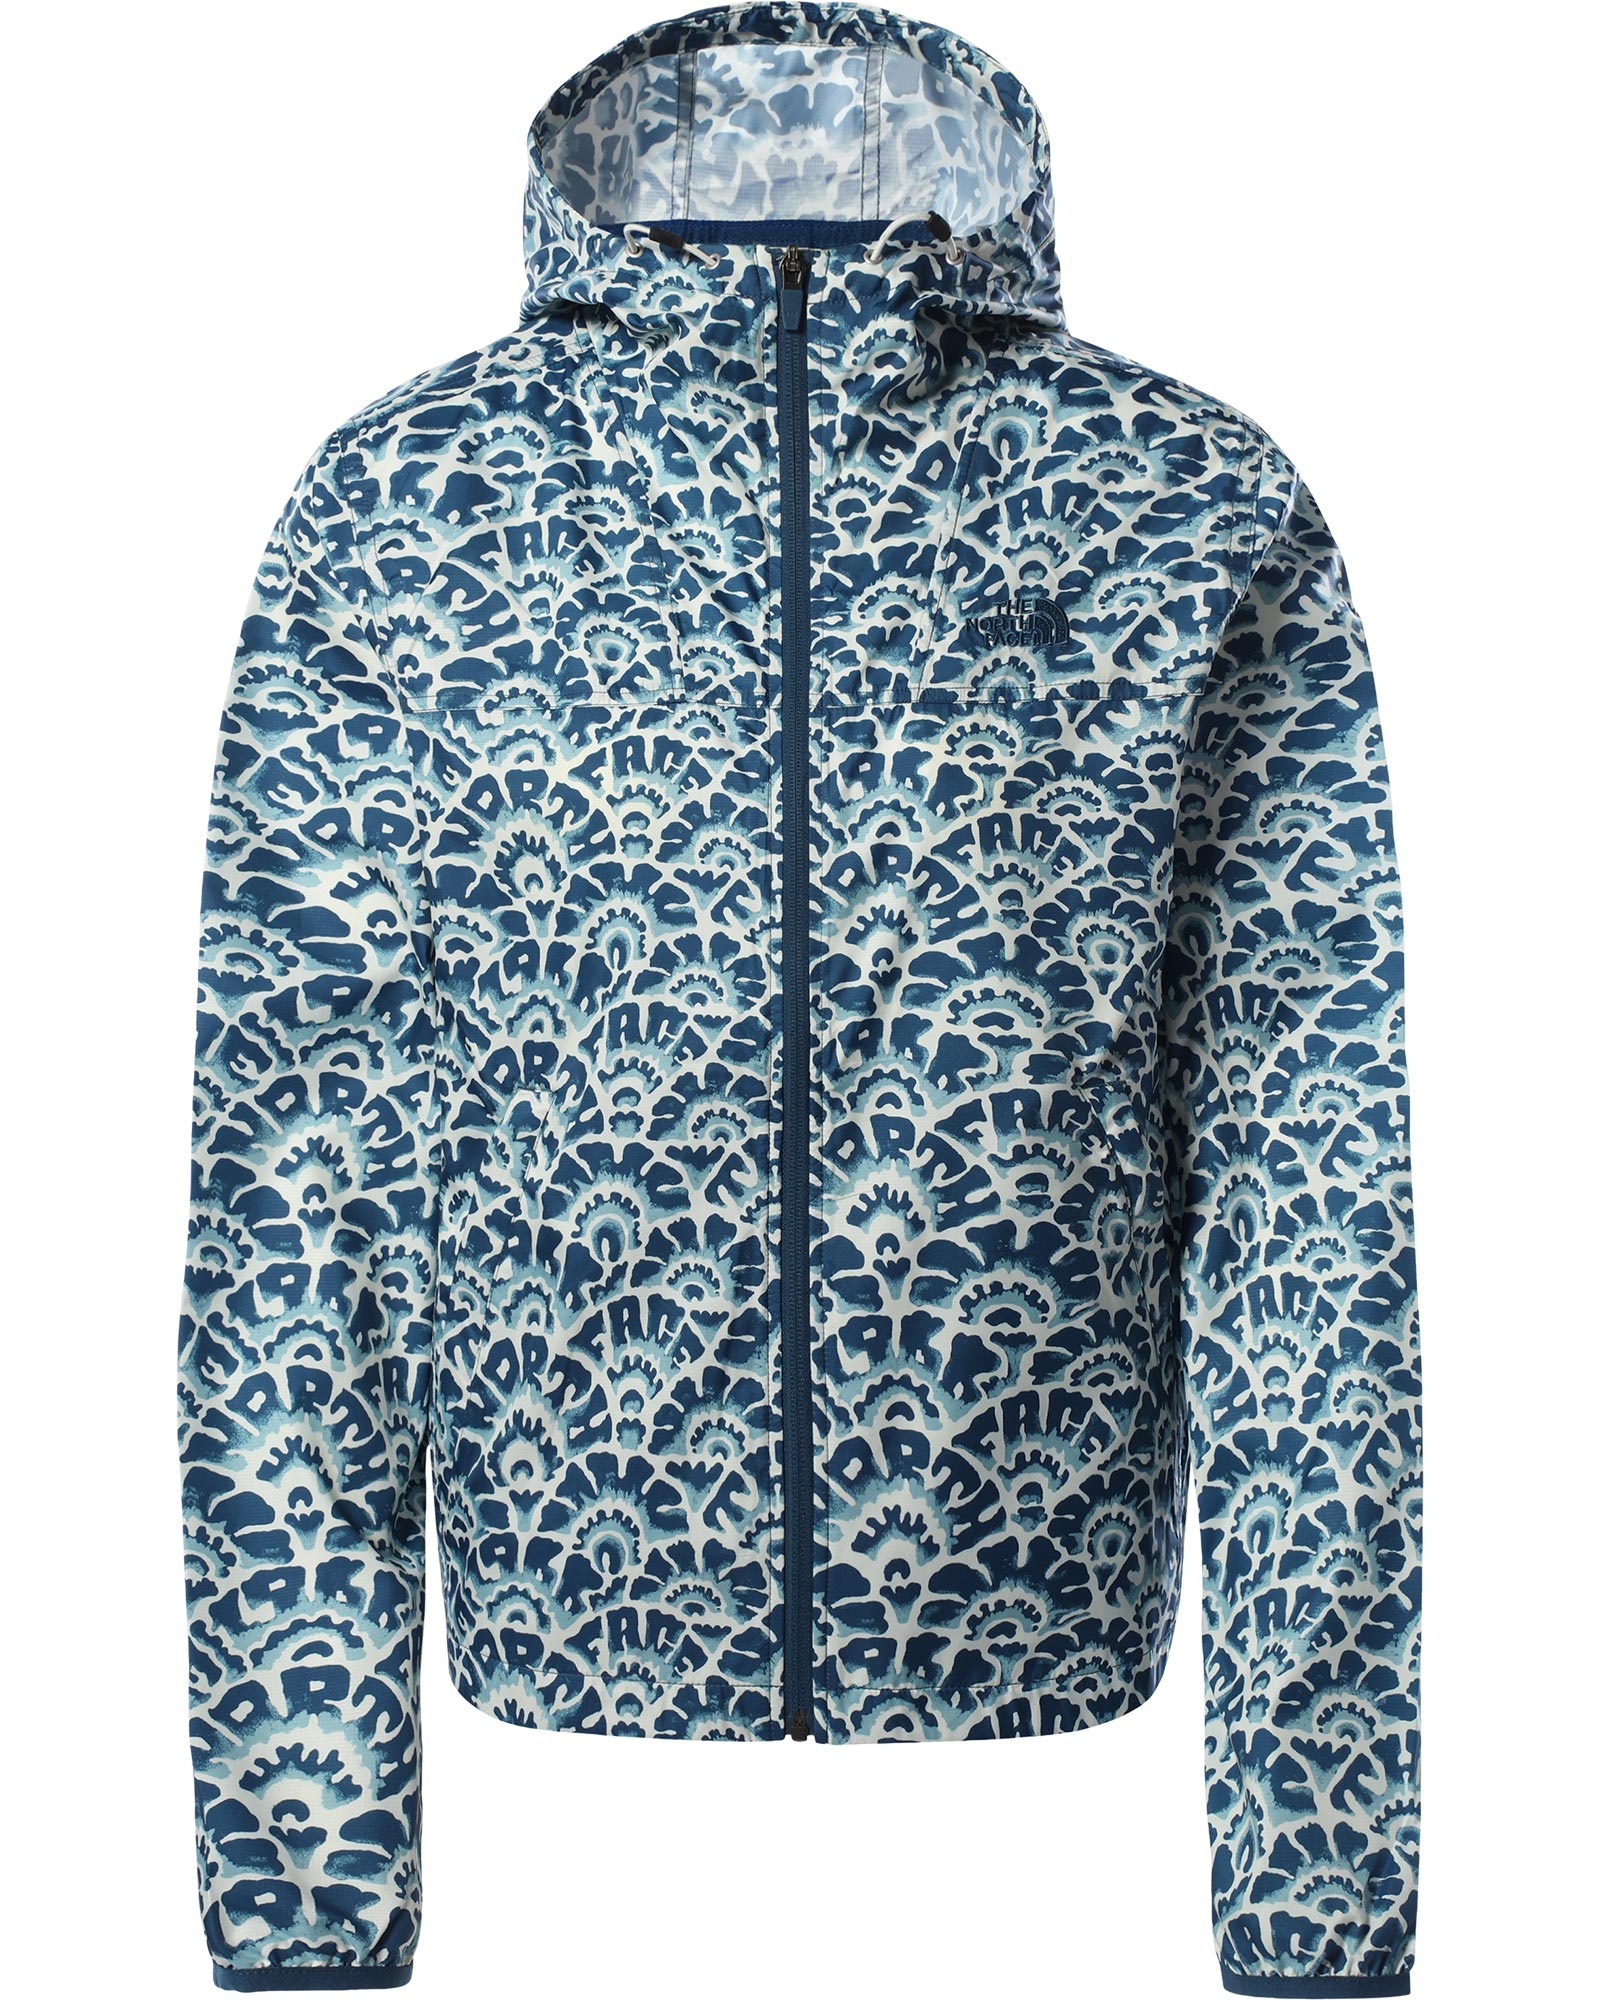 The North Face Cyclone Women’s Jacket - Monterey Blue Print L